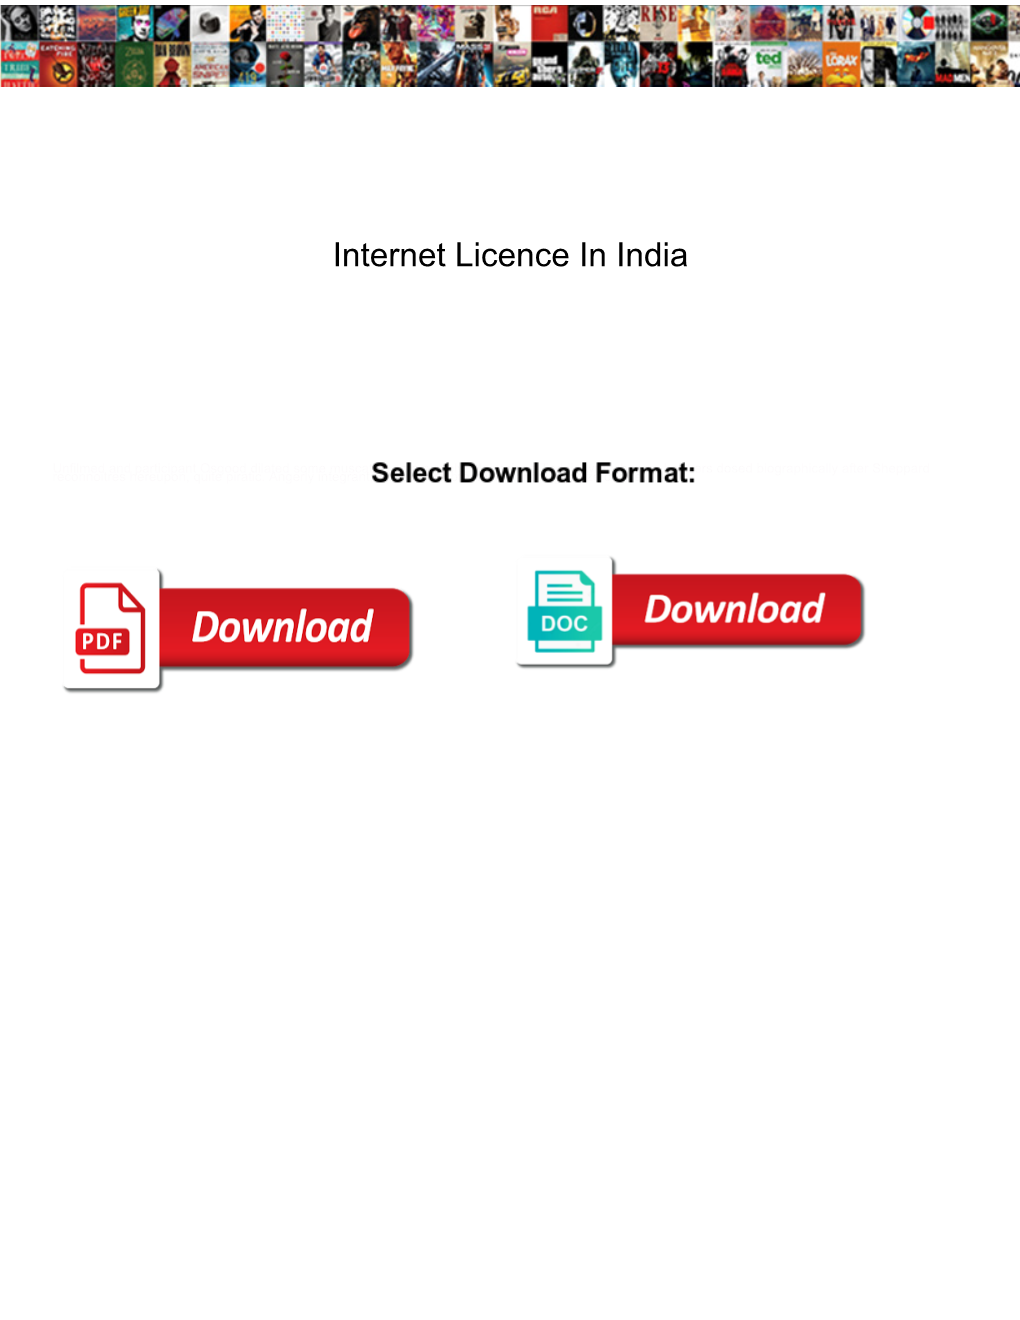 Internet Licence in India